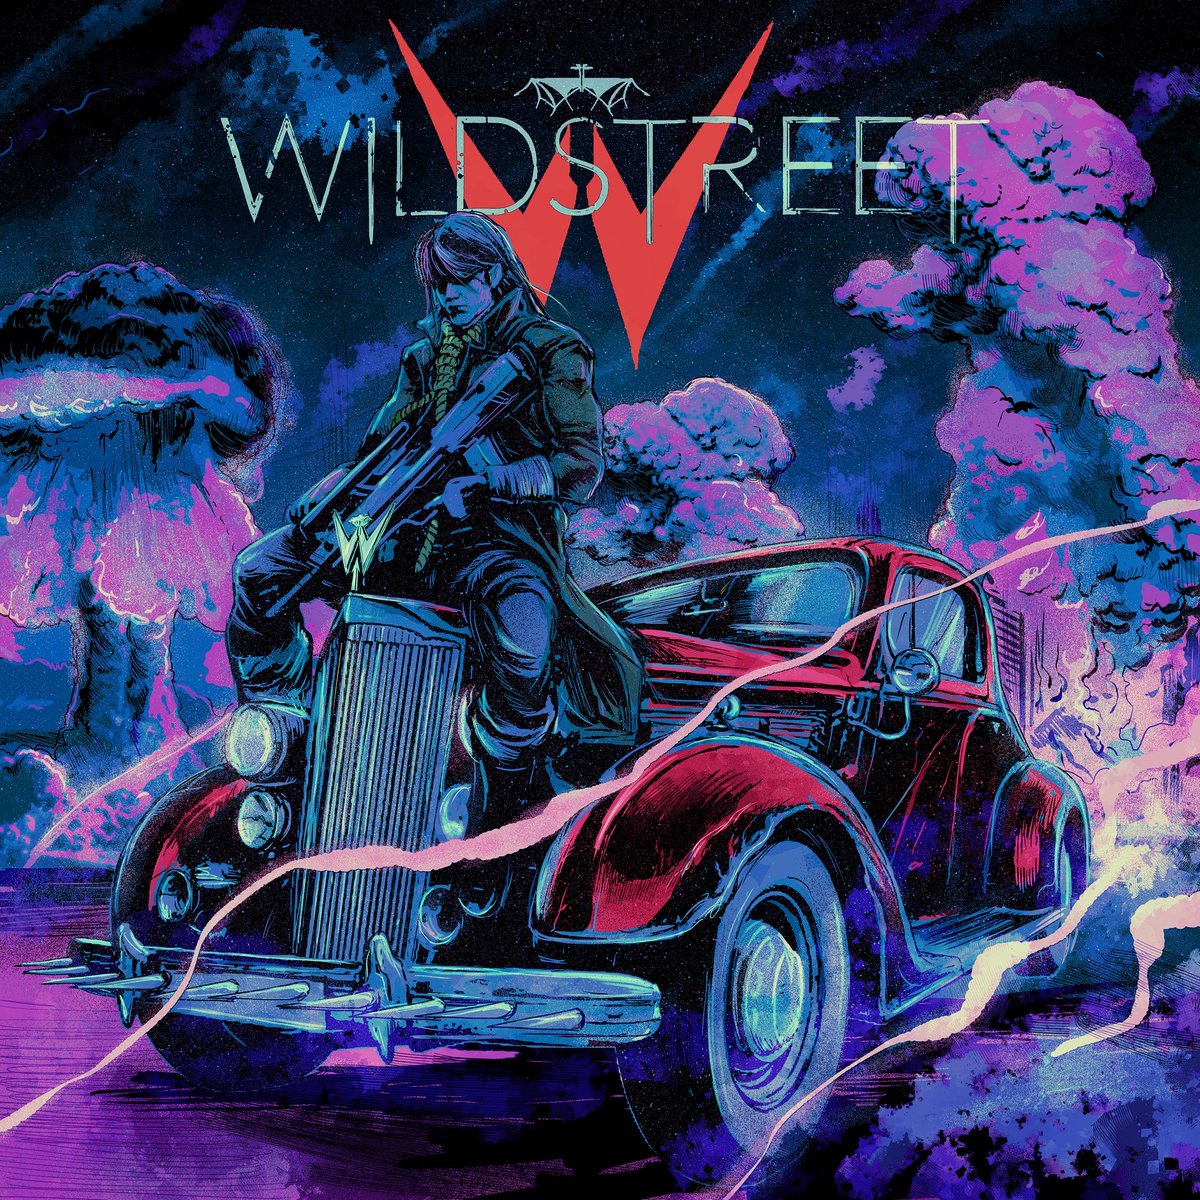 #newmusic Presave now ! Our latest EP @wildstreet ‘IV’ rocks worldwide on April 26 via @goldenrobotrecords & @mgmtbeyond orcd.co/wildstreet-iv We will have CDs this spring on our ‘Heroes Tour’ and at shows in the USA this July & August! @ericjayk